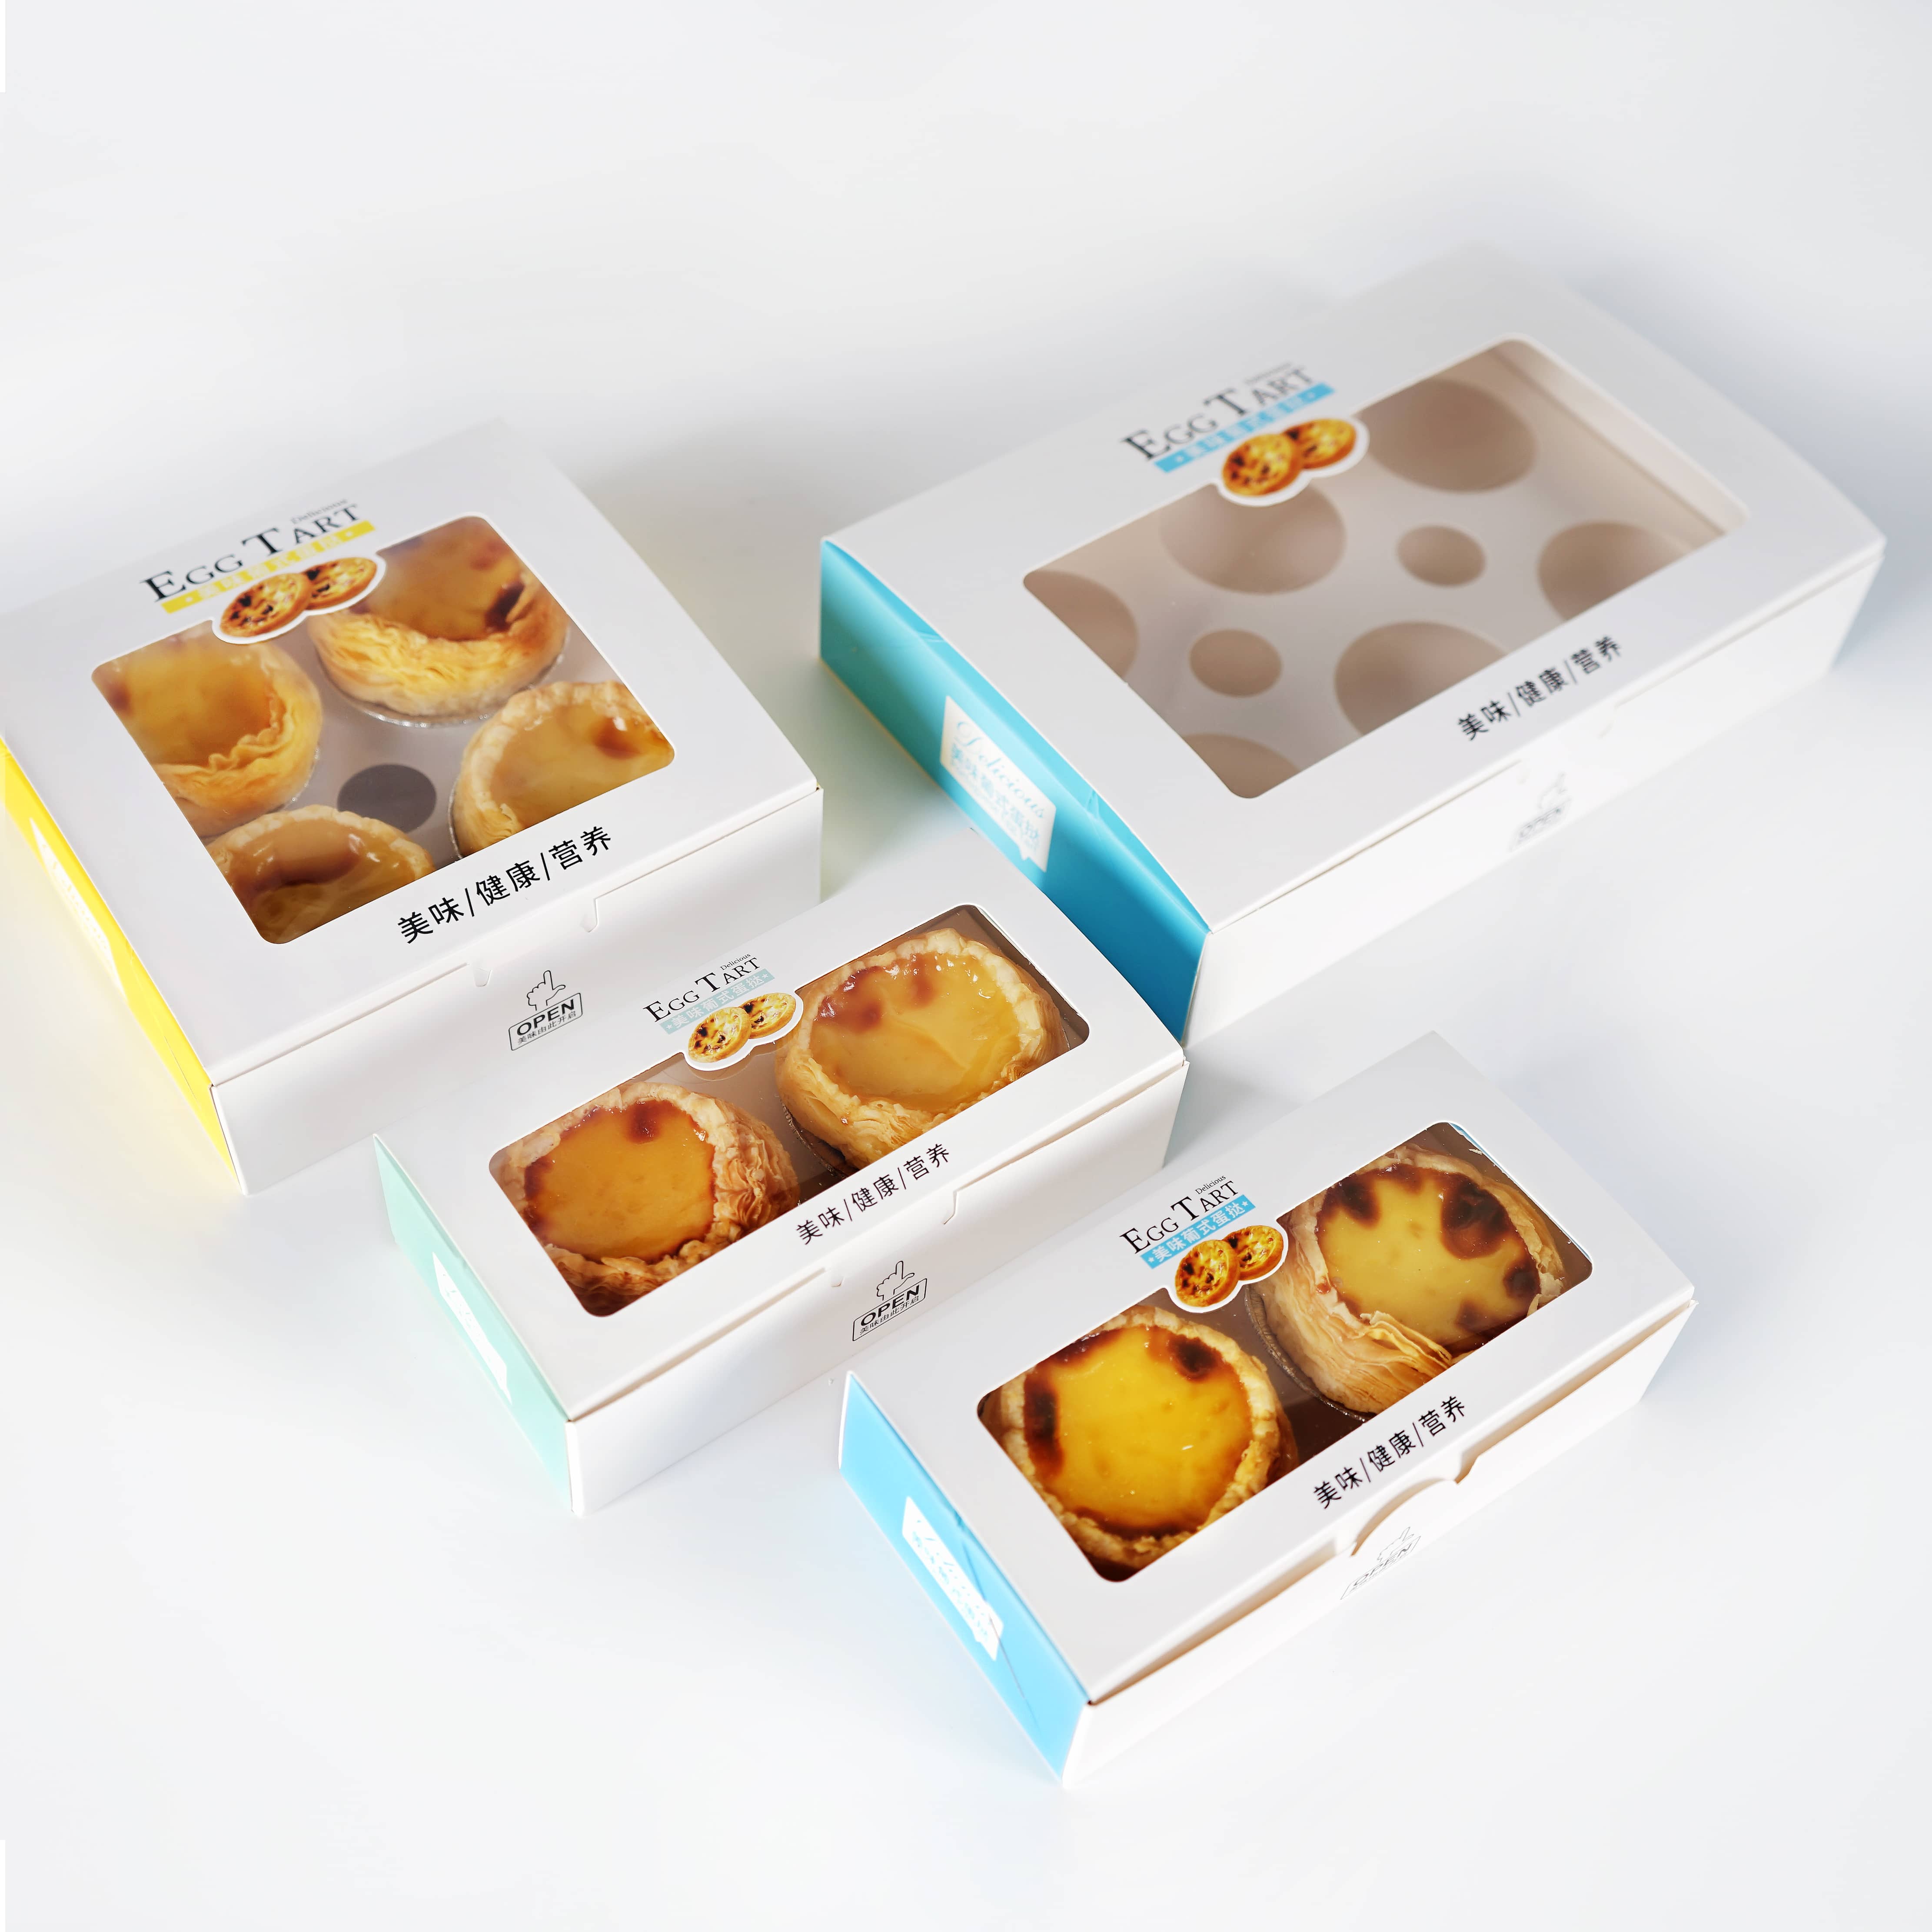 Cup Cake Macaron Tart Dessert Portuguese Egg Tart Box With Clear Lid Featured Image